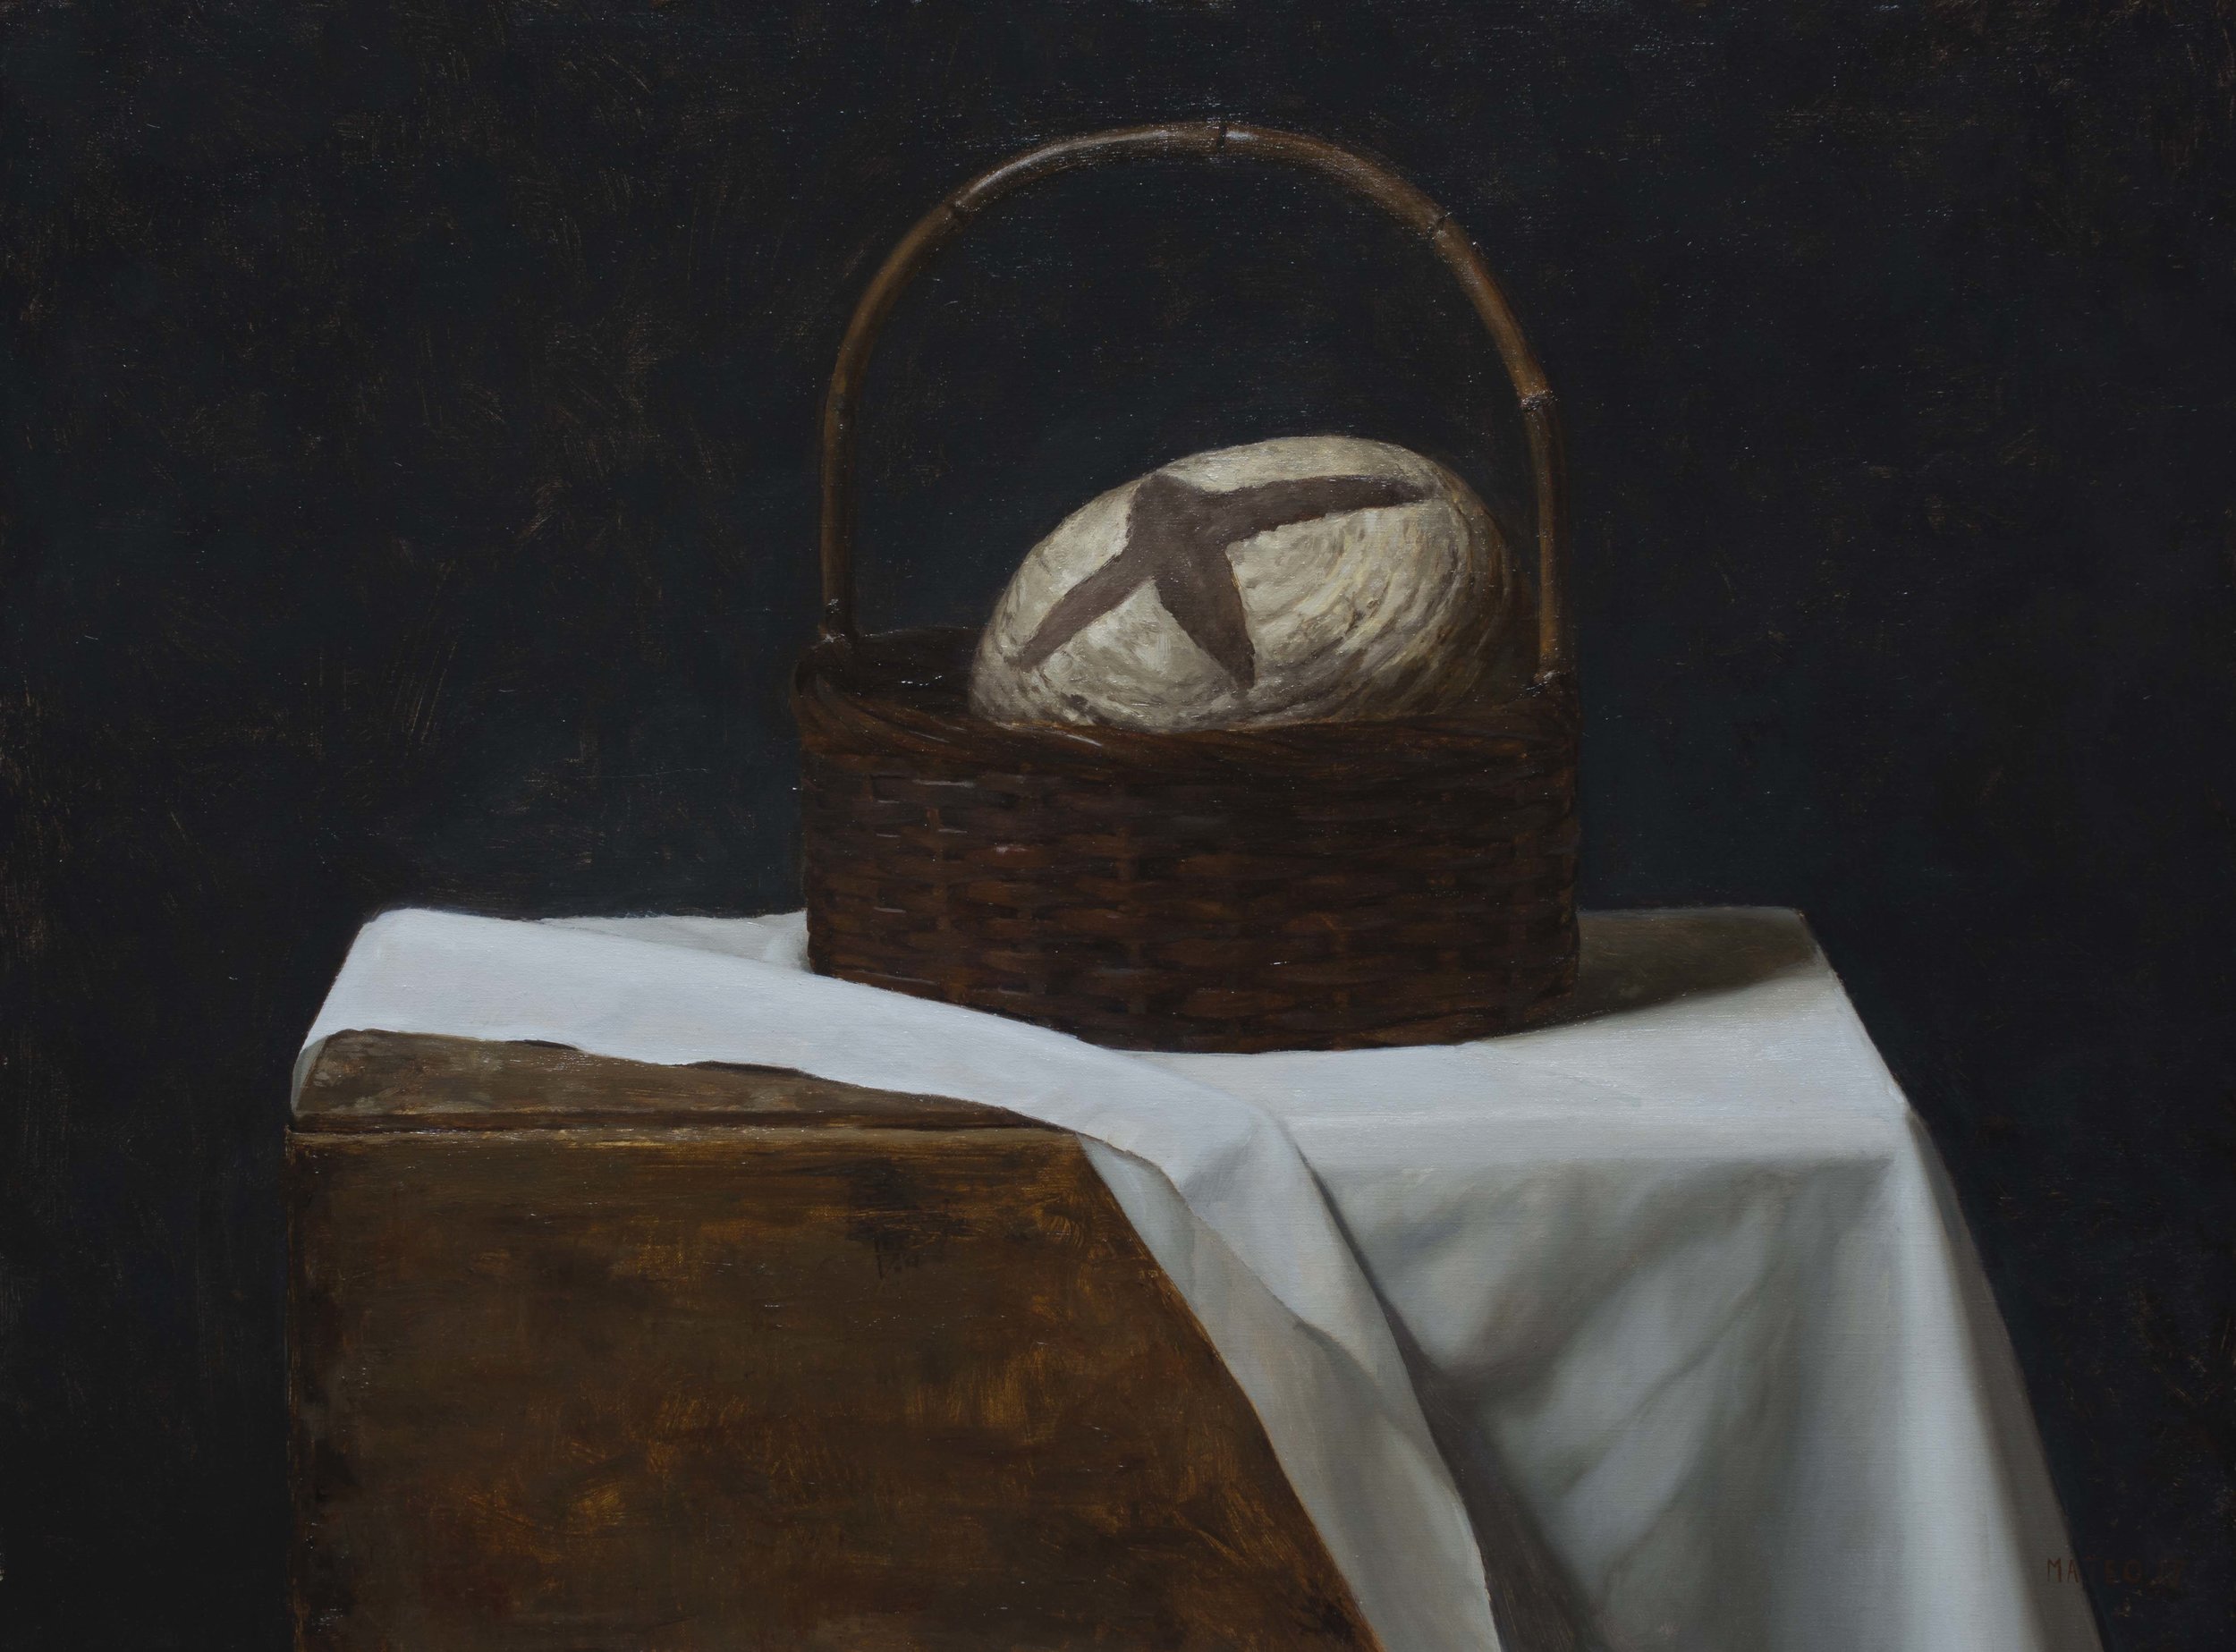 Basket of Bread. Oil on Canvas. 18x24